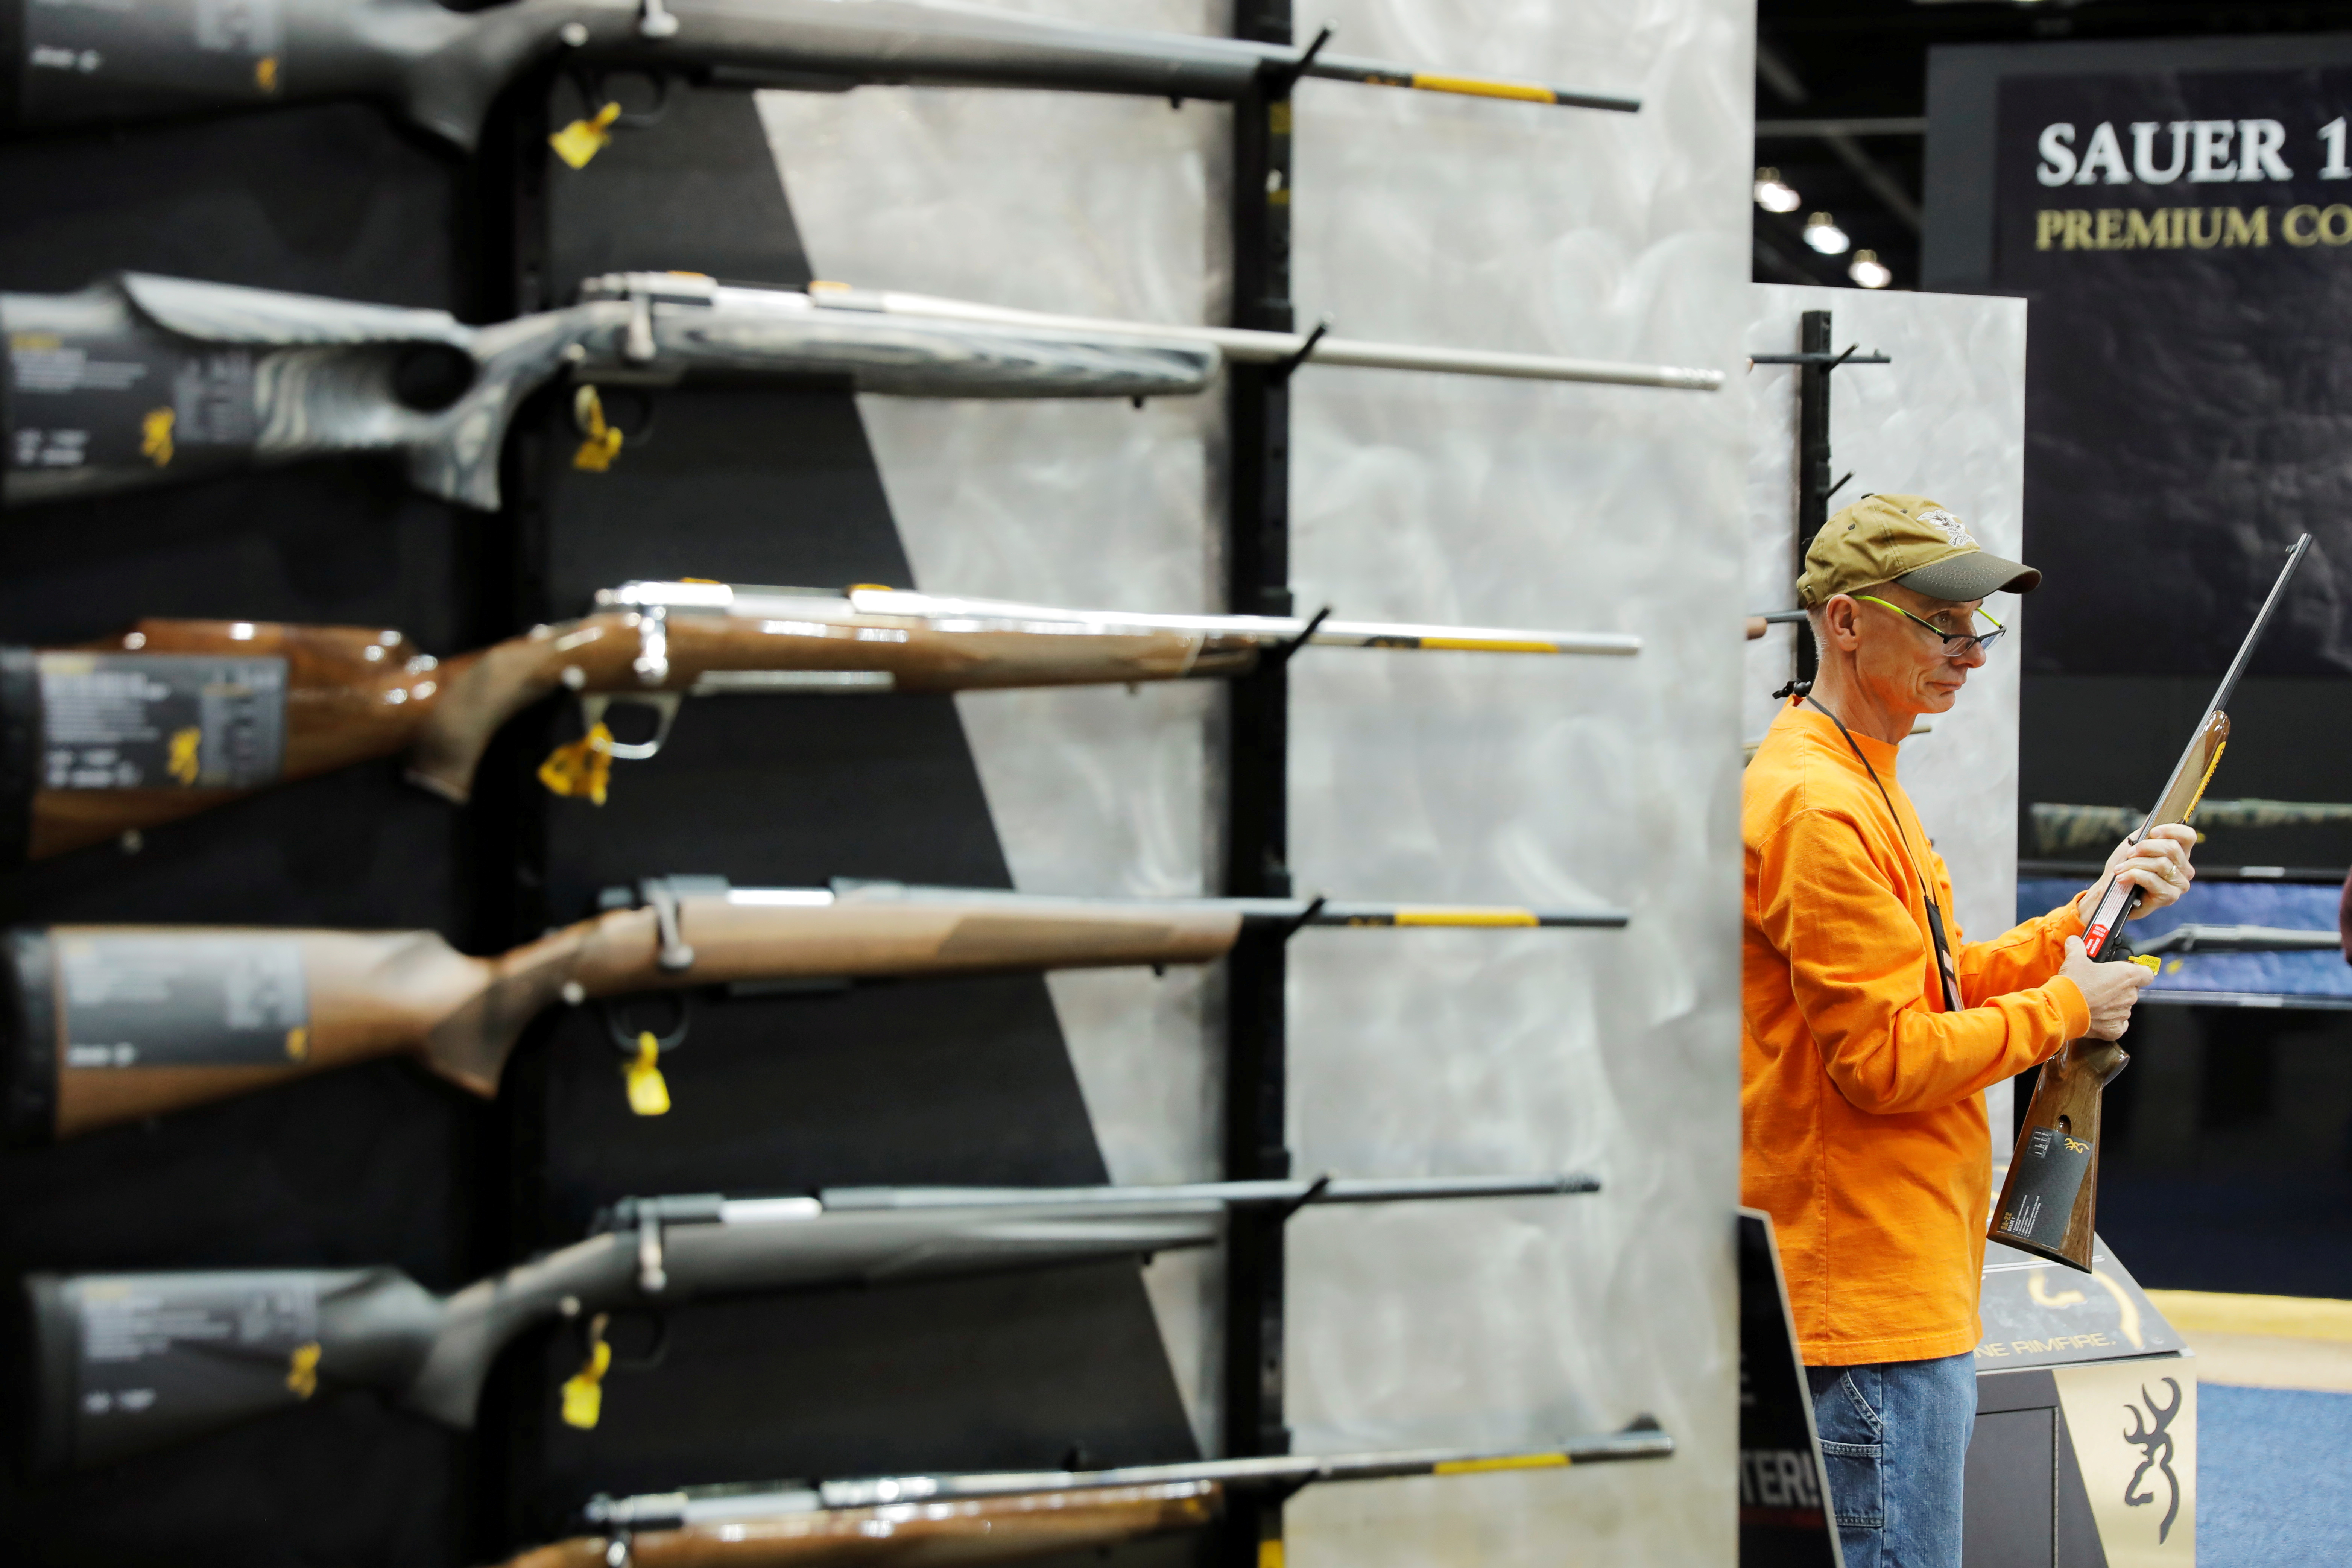 A man inspects a Browning shotgun during the National Rifle Association (NRA) annual meeting in Indianapolis, Indiana